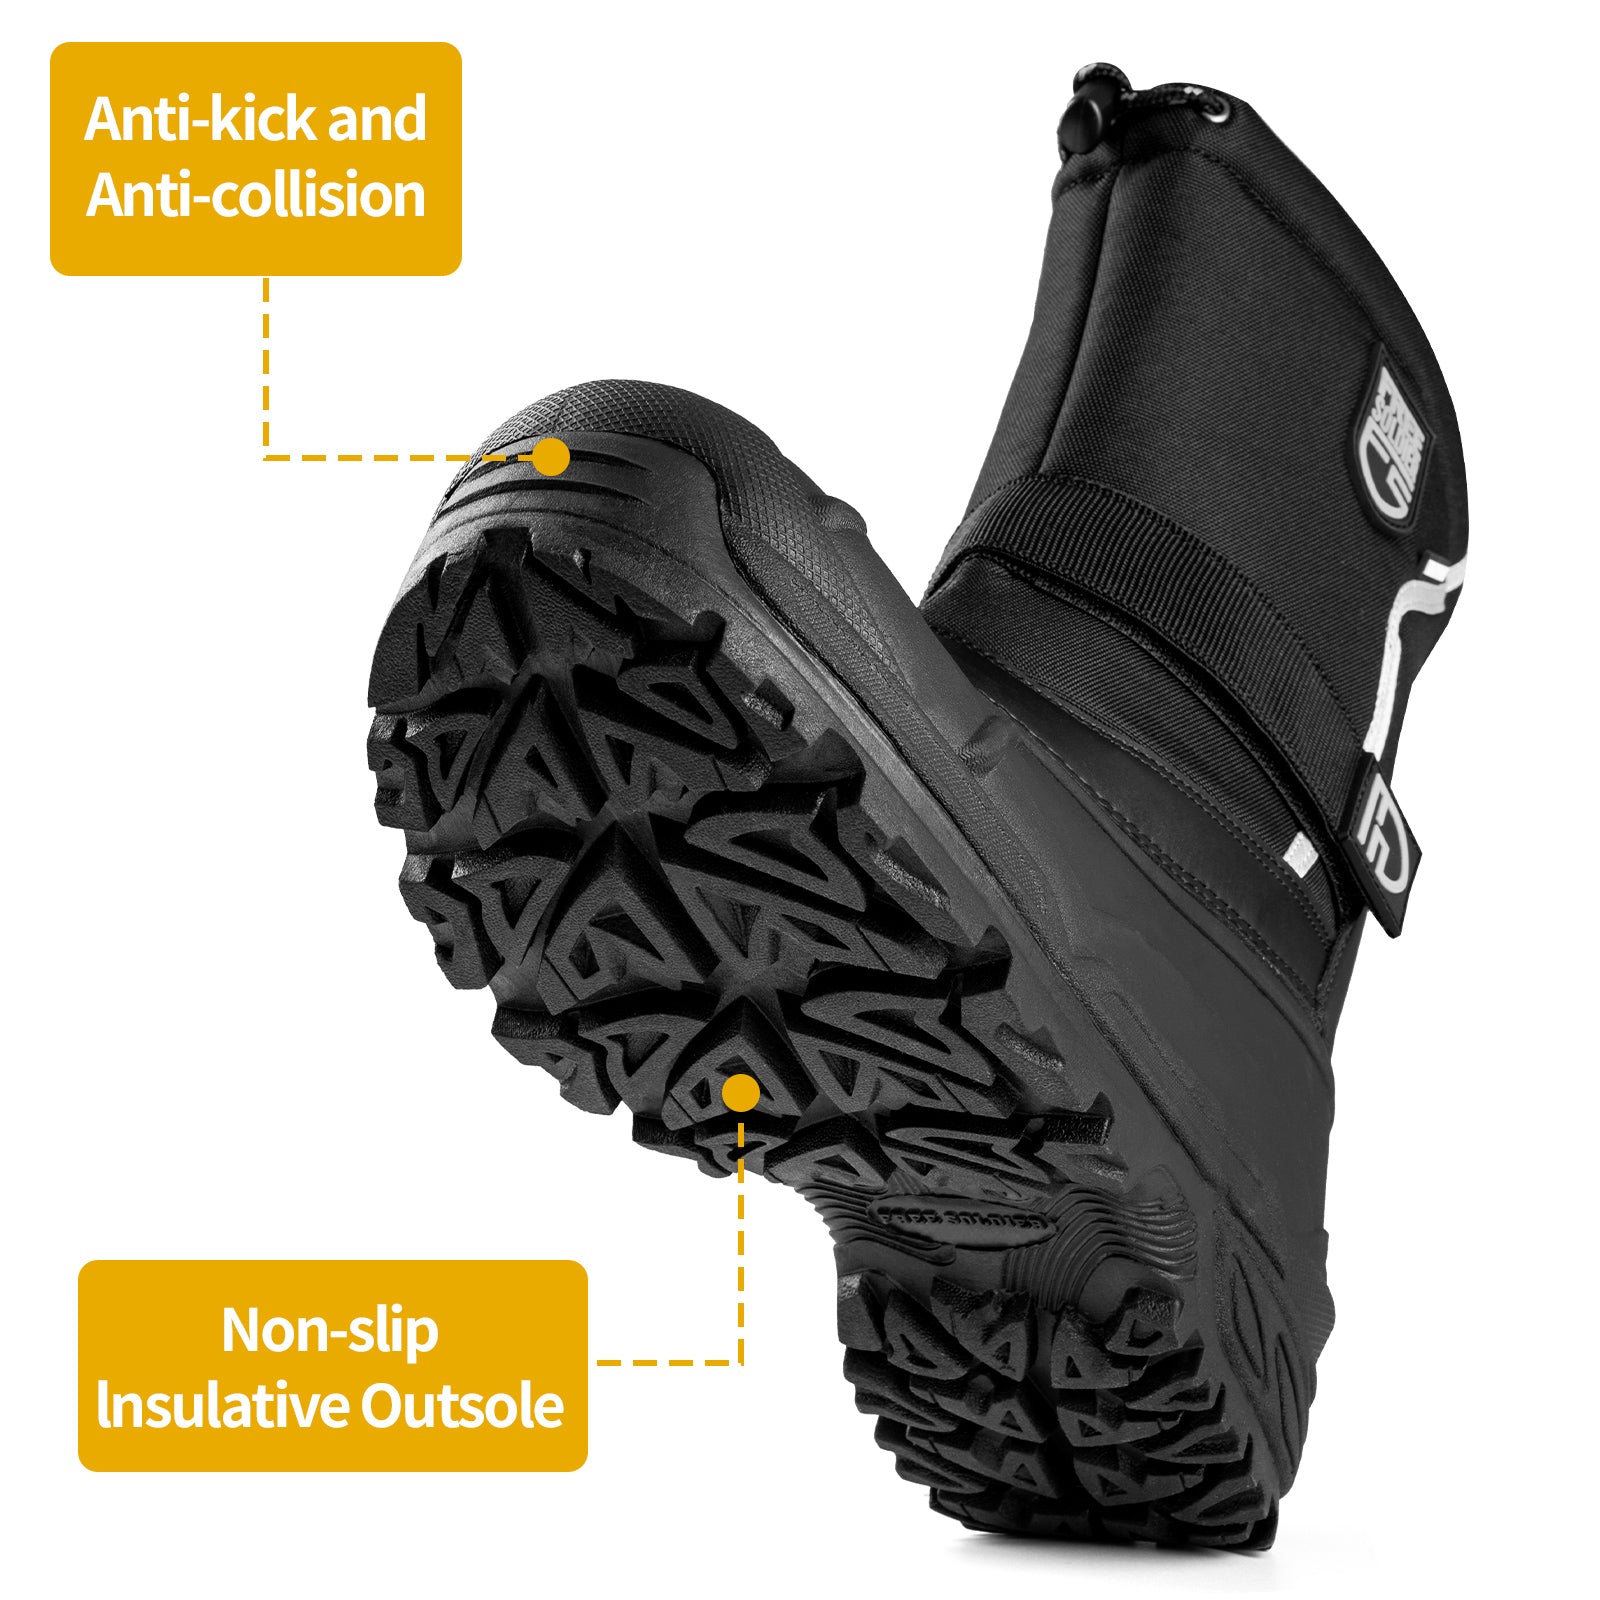 Men's Snow Boots with Removable Lining